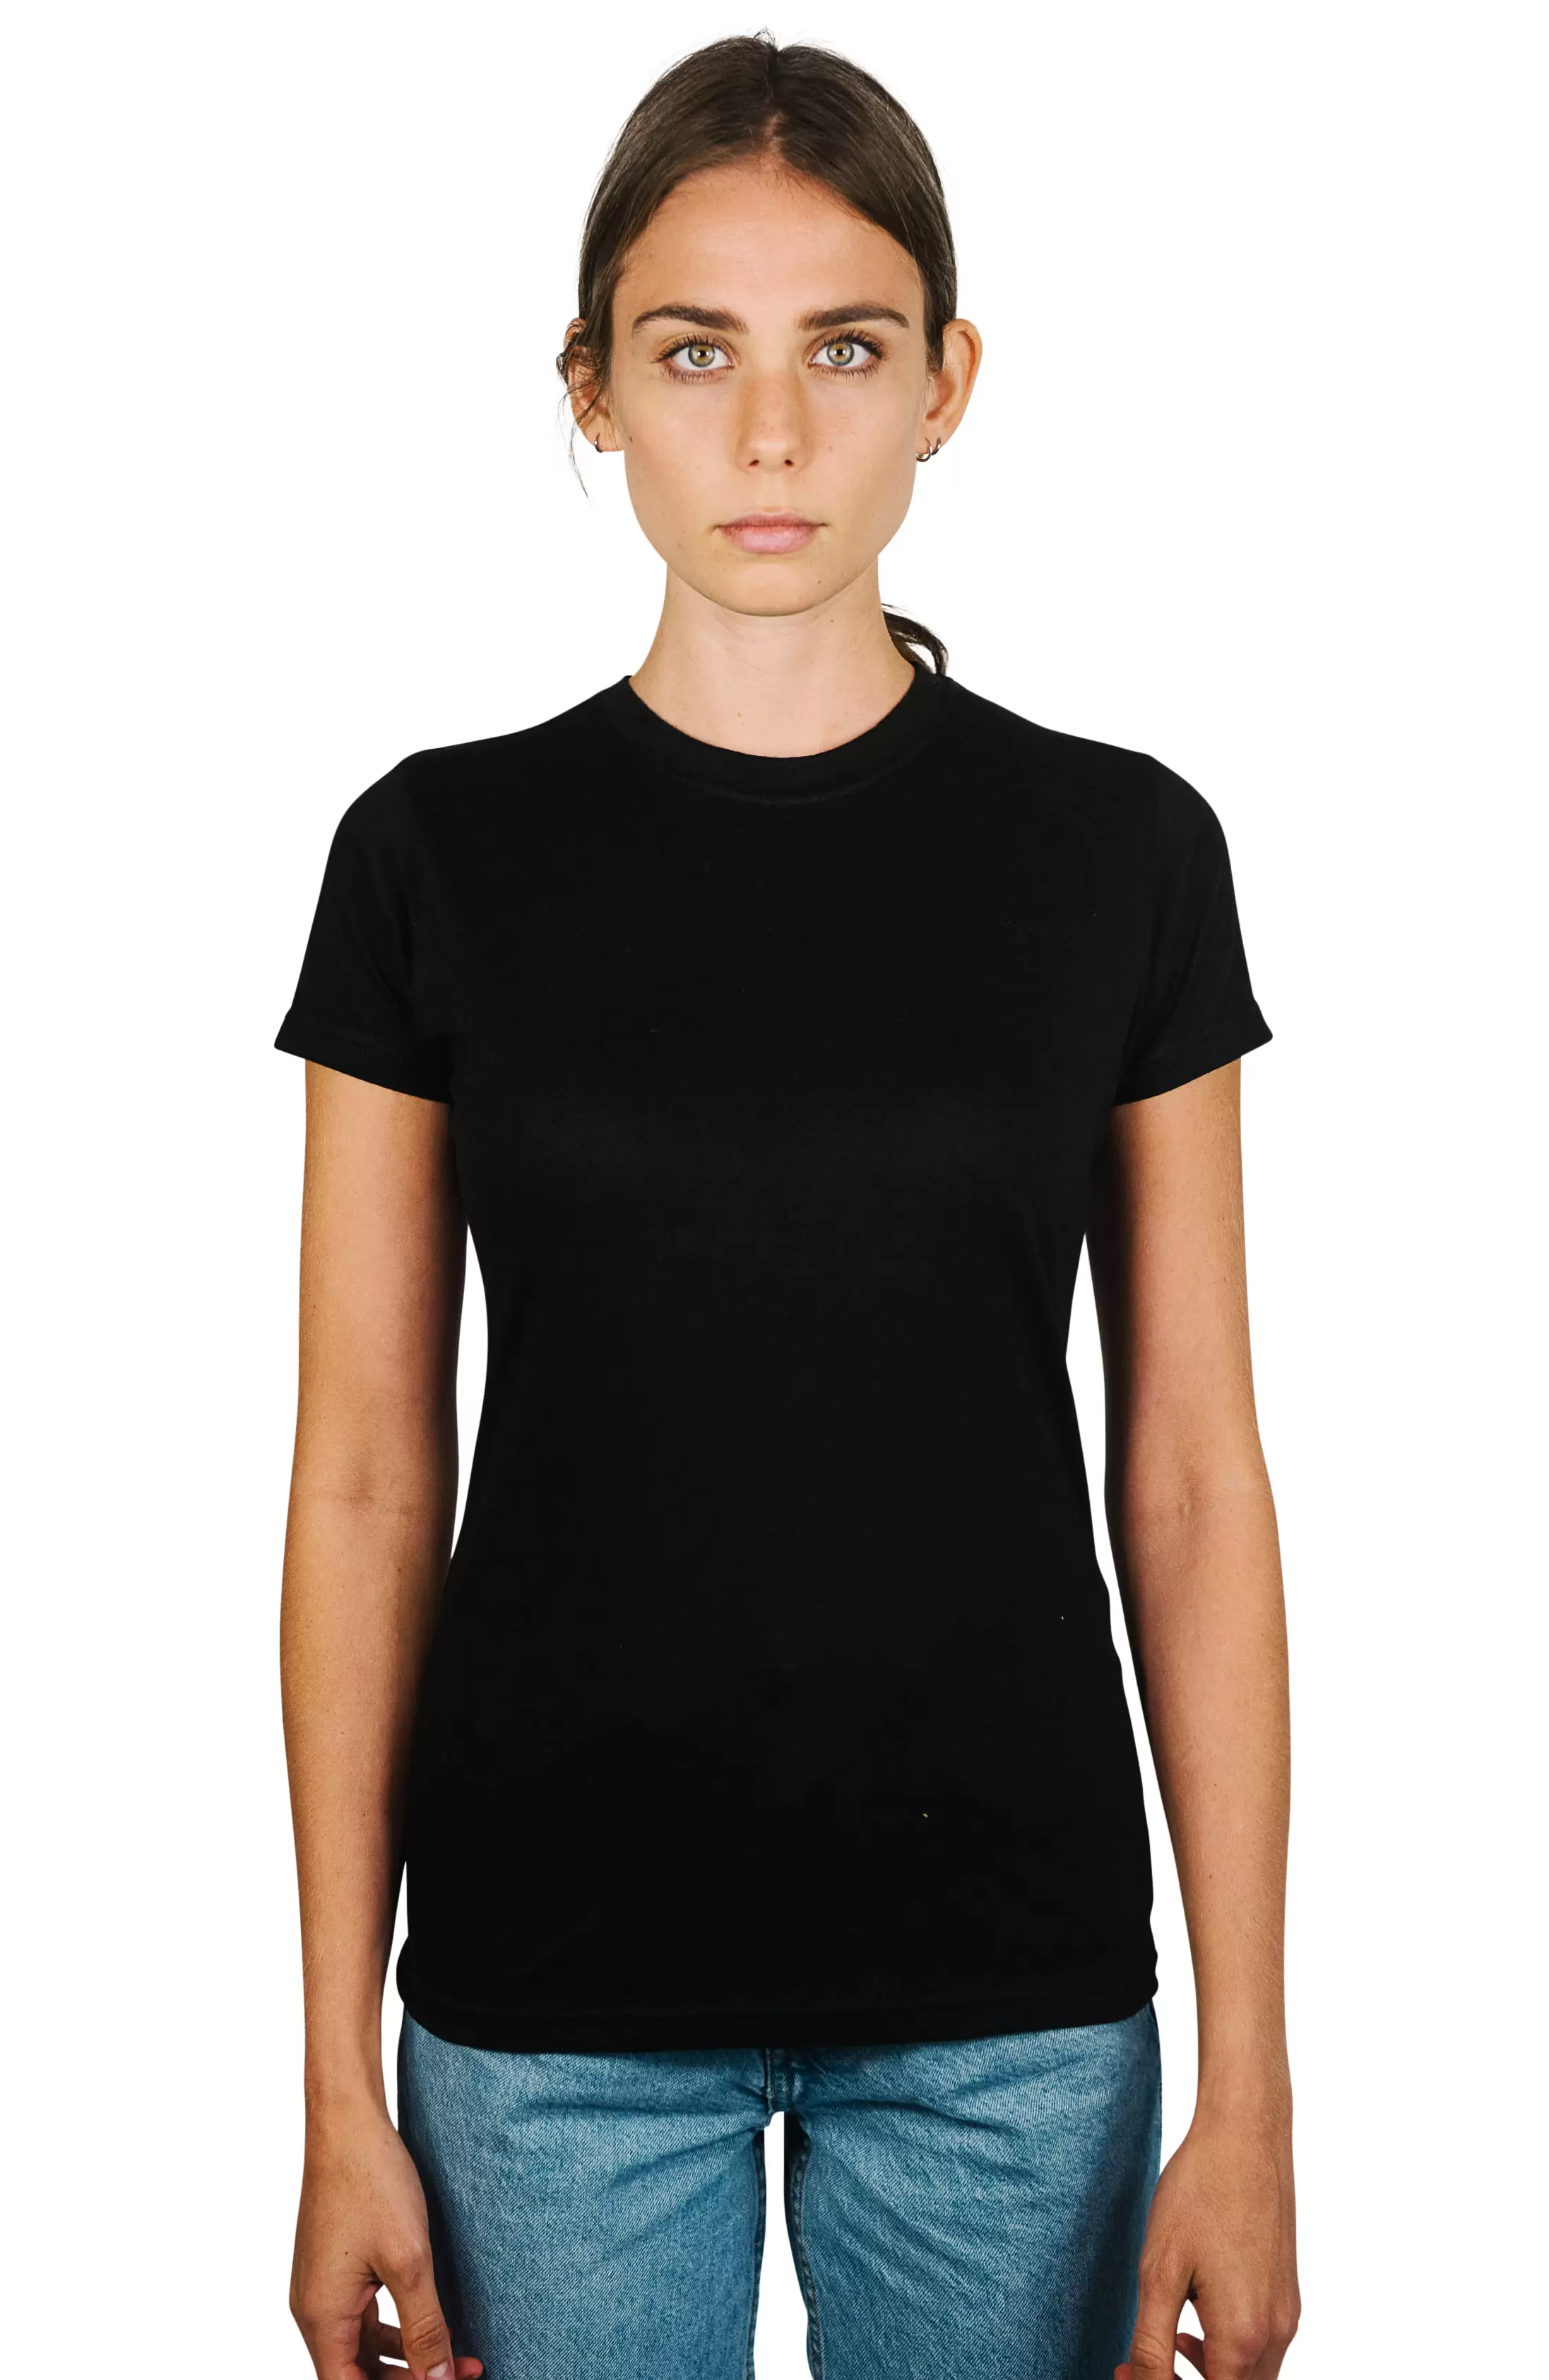 0240 Tultex Ladies Ultra Blend Tee - From $3.27